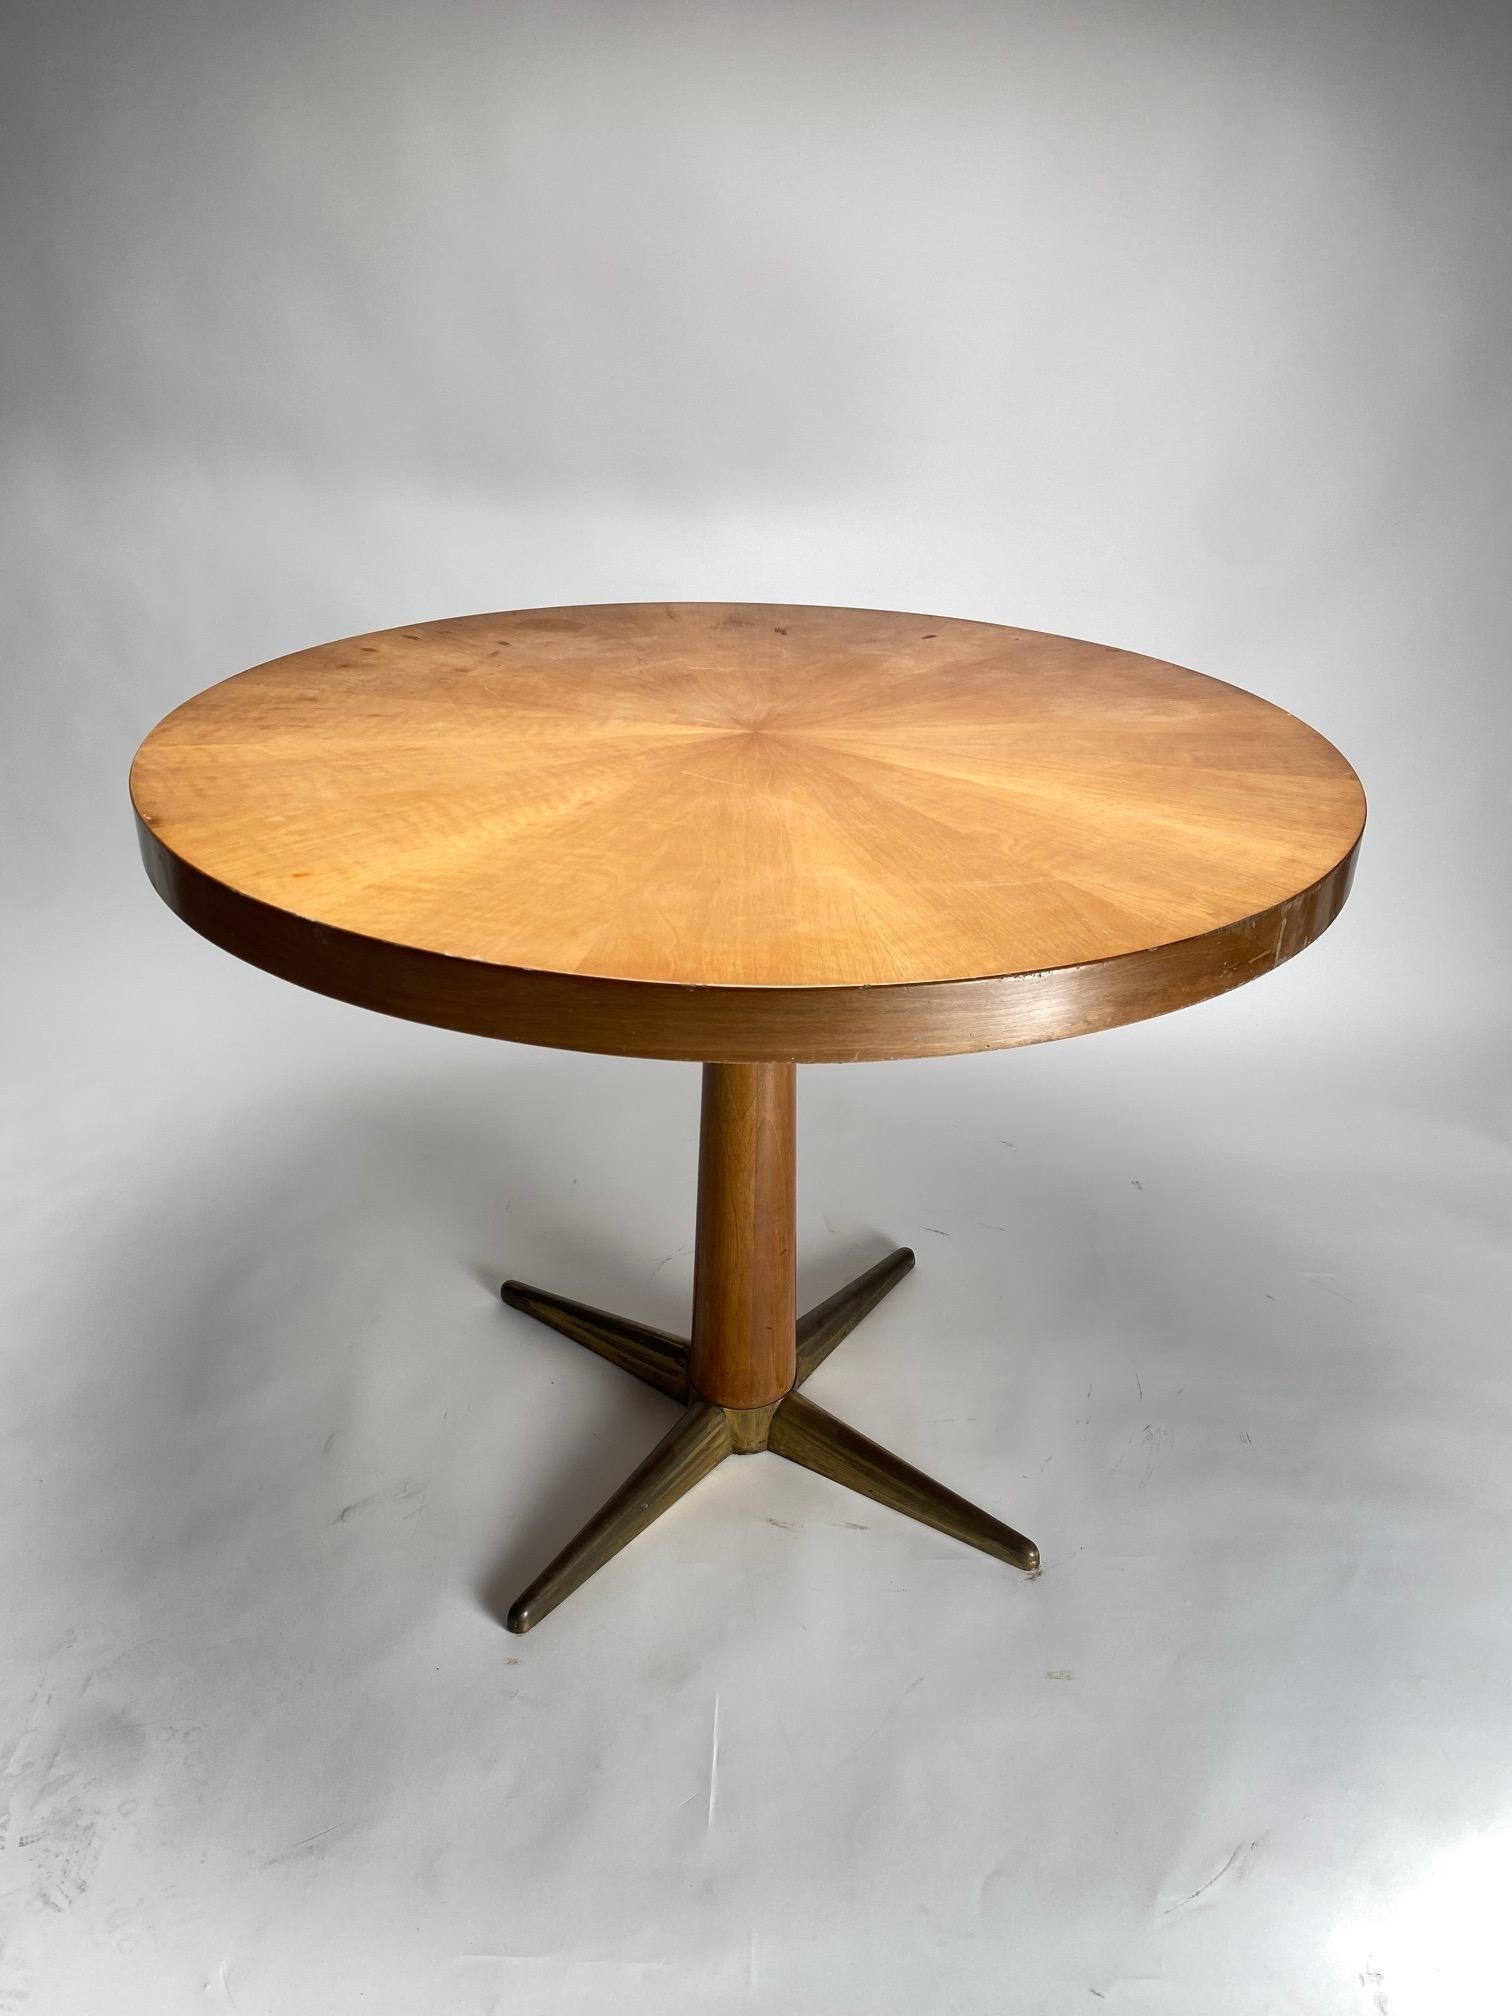 Mid-Century Modern Mid-Century Round Table in wood and brass, Gio Ponti Style, Italy 1950s For Sale